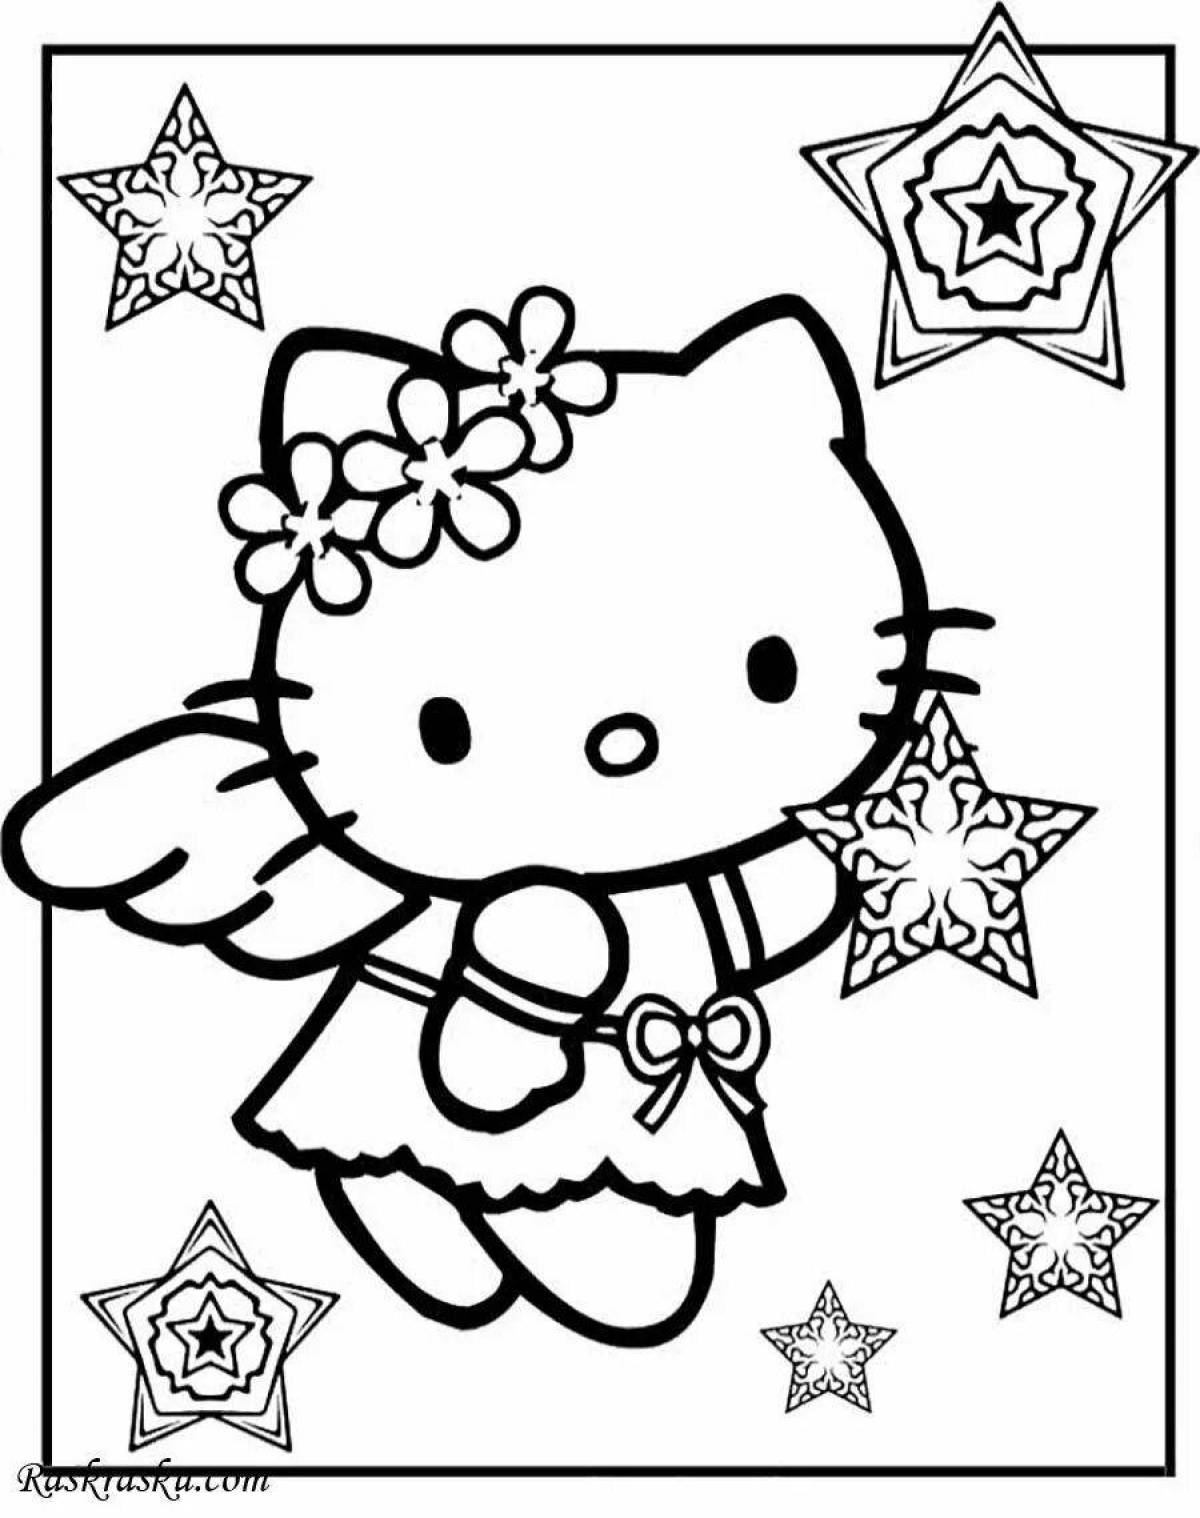 Kitty's gorgeous Christmas coloring book